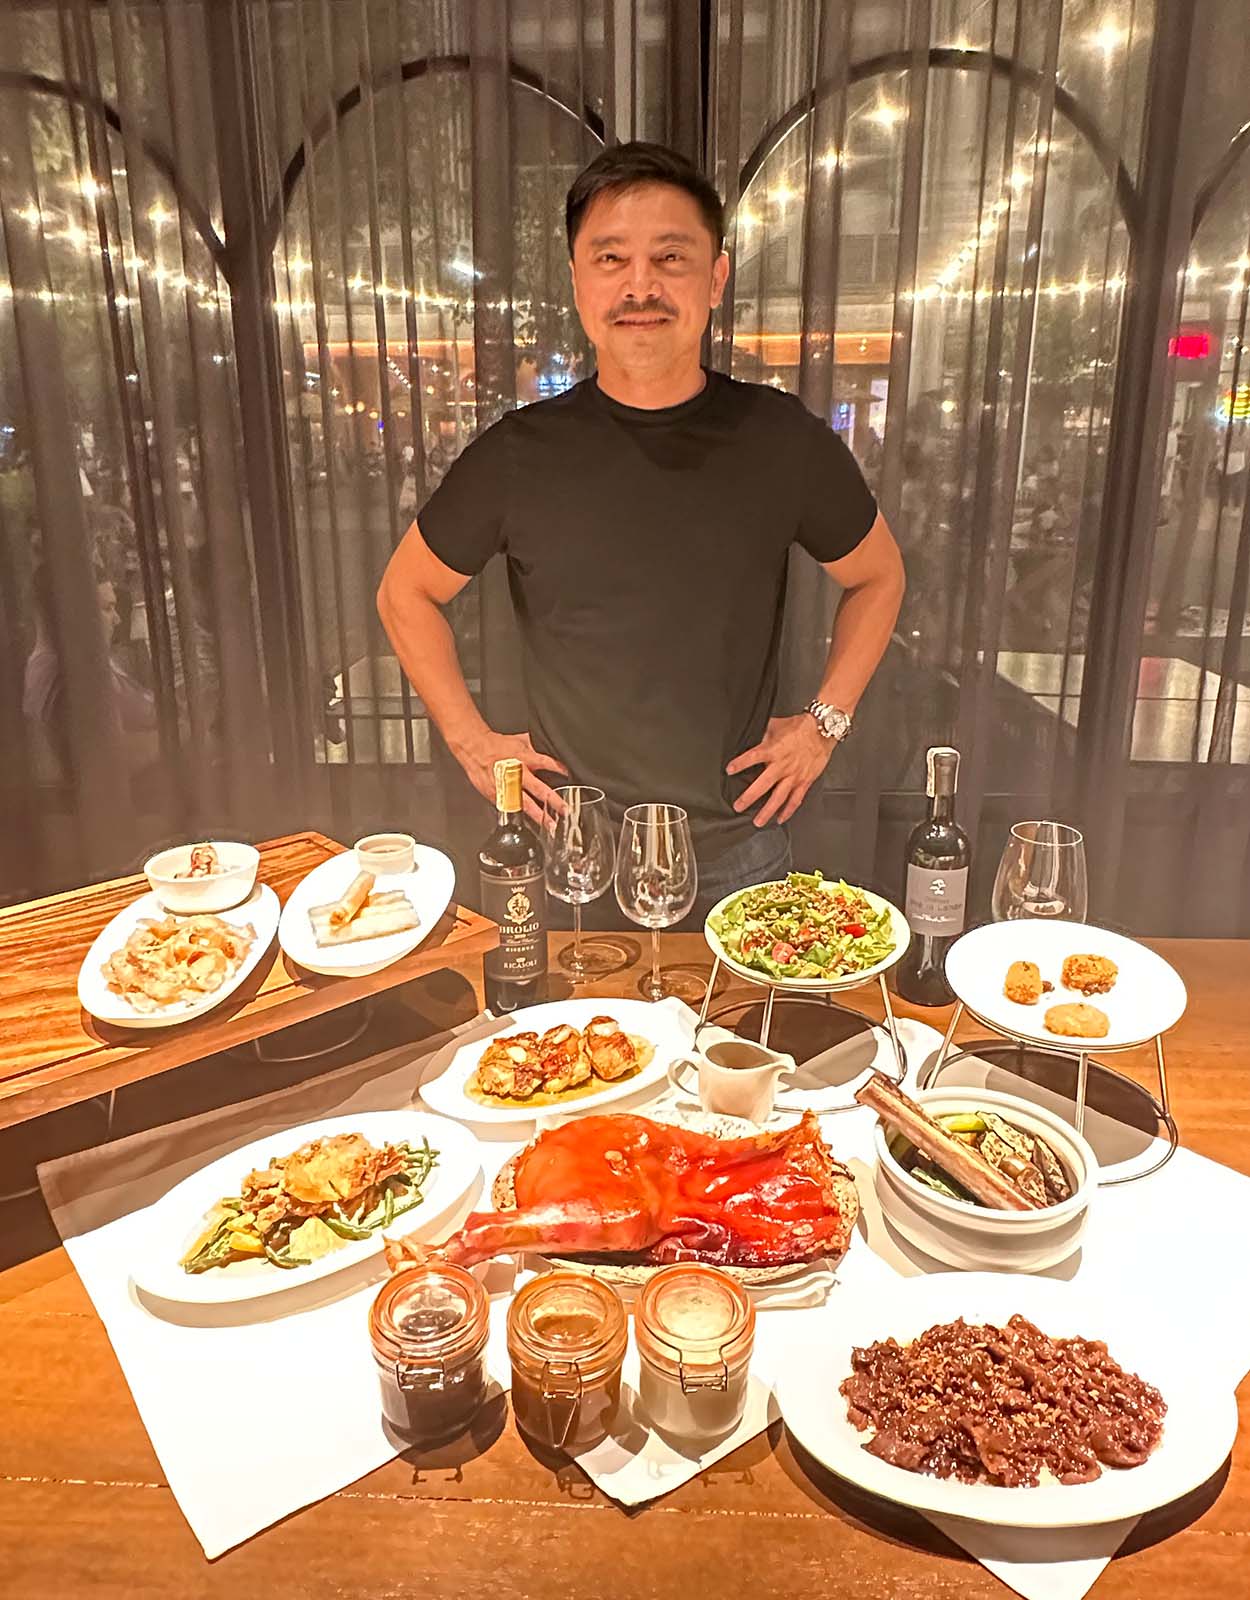 family-friendly restaurant by astute businessman and chef Marvin Agustin 